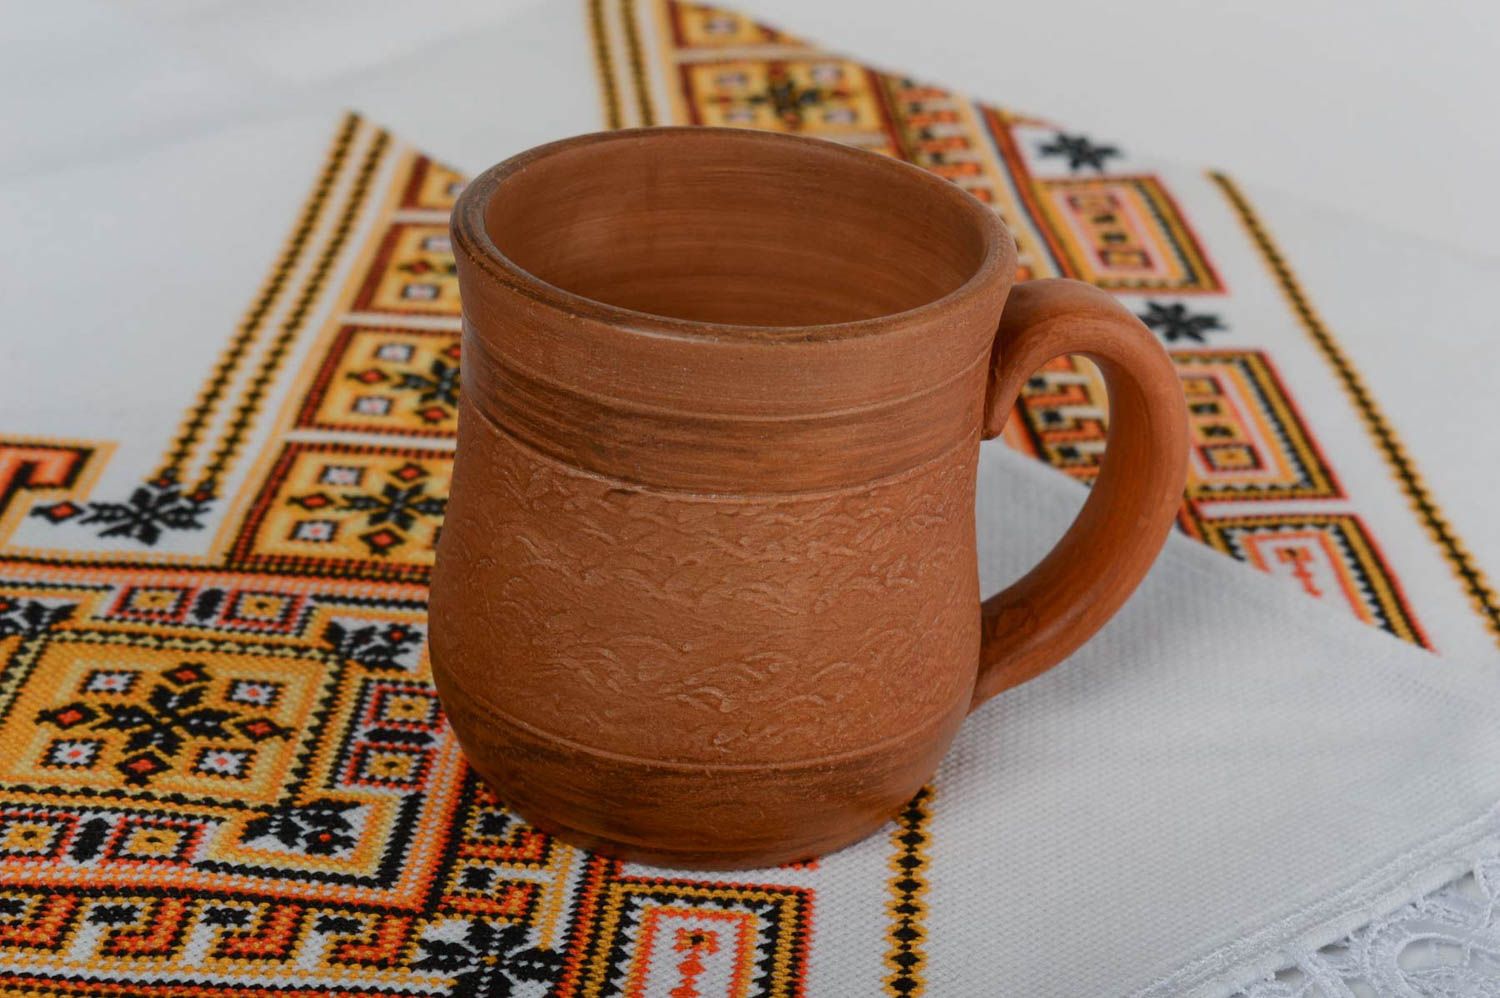 8 oz clay terracotta Mexican cup with handle and rustic pattern photo 1